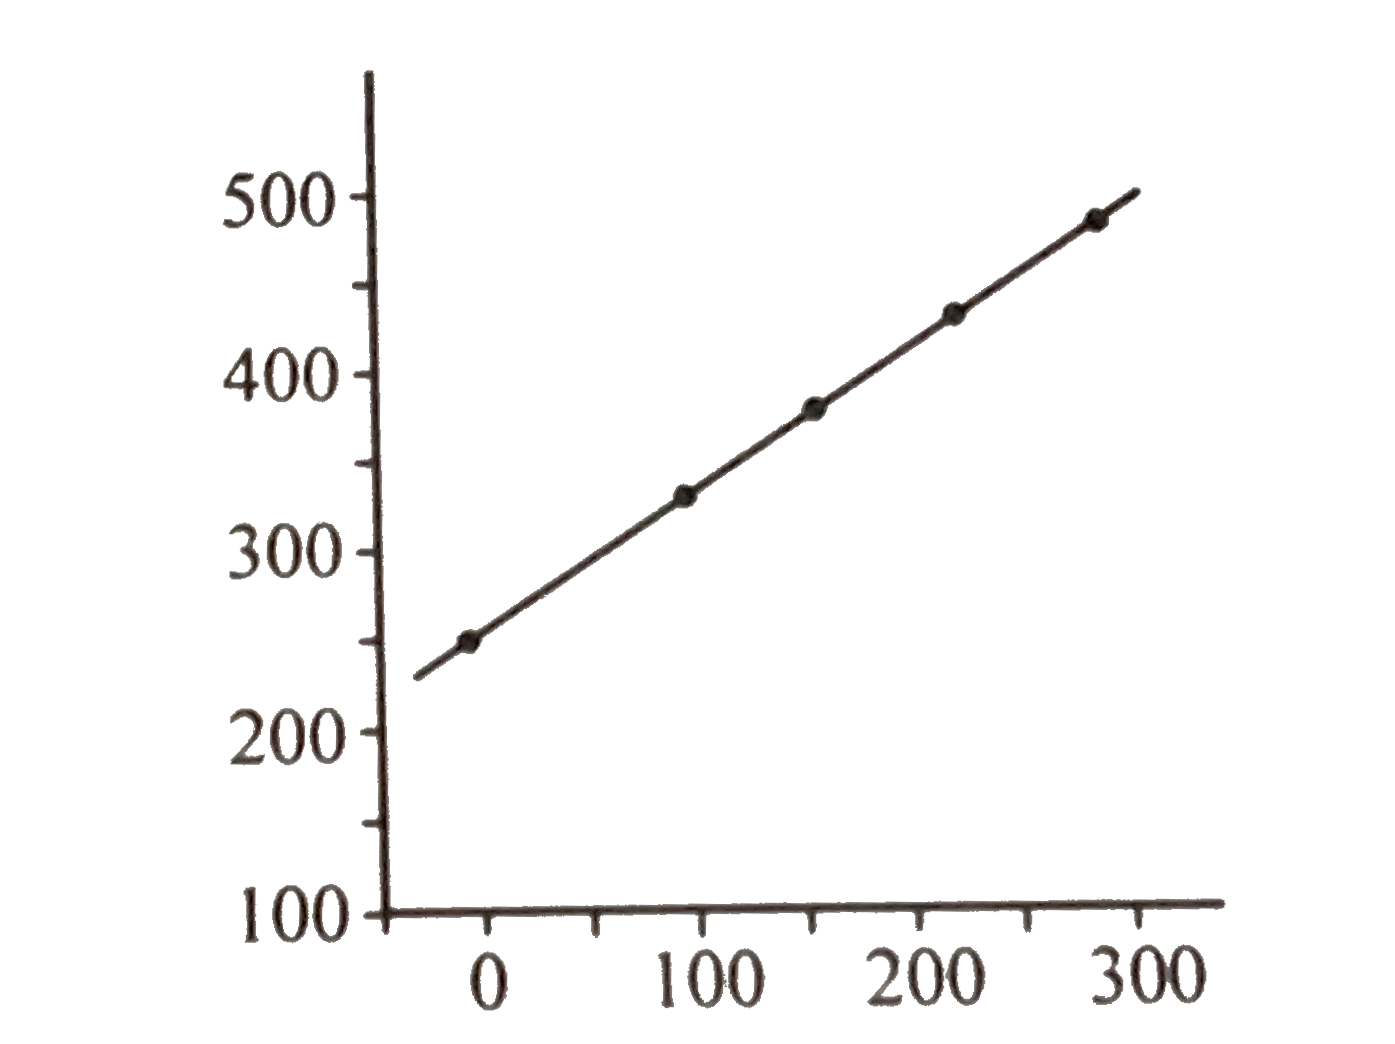 At  constant  pressure , the  volume  of a  fixed  mass  of a gas  varies  as a function of temperarture  as shown  in the  graph        the  volume  of the  gas 300^(@) C   is larger than  at 0^(@)C  by a factor  of